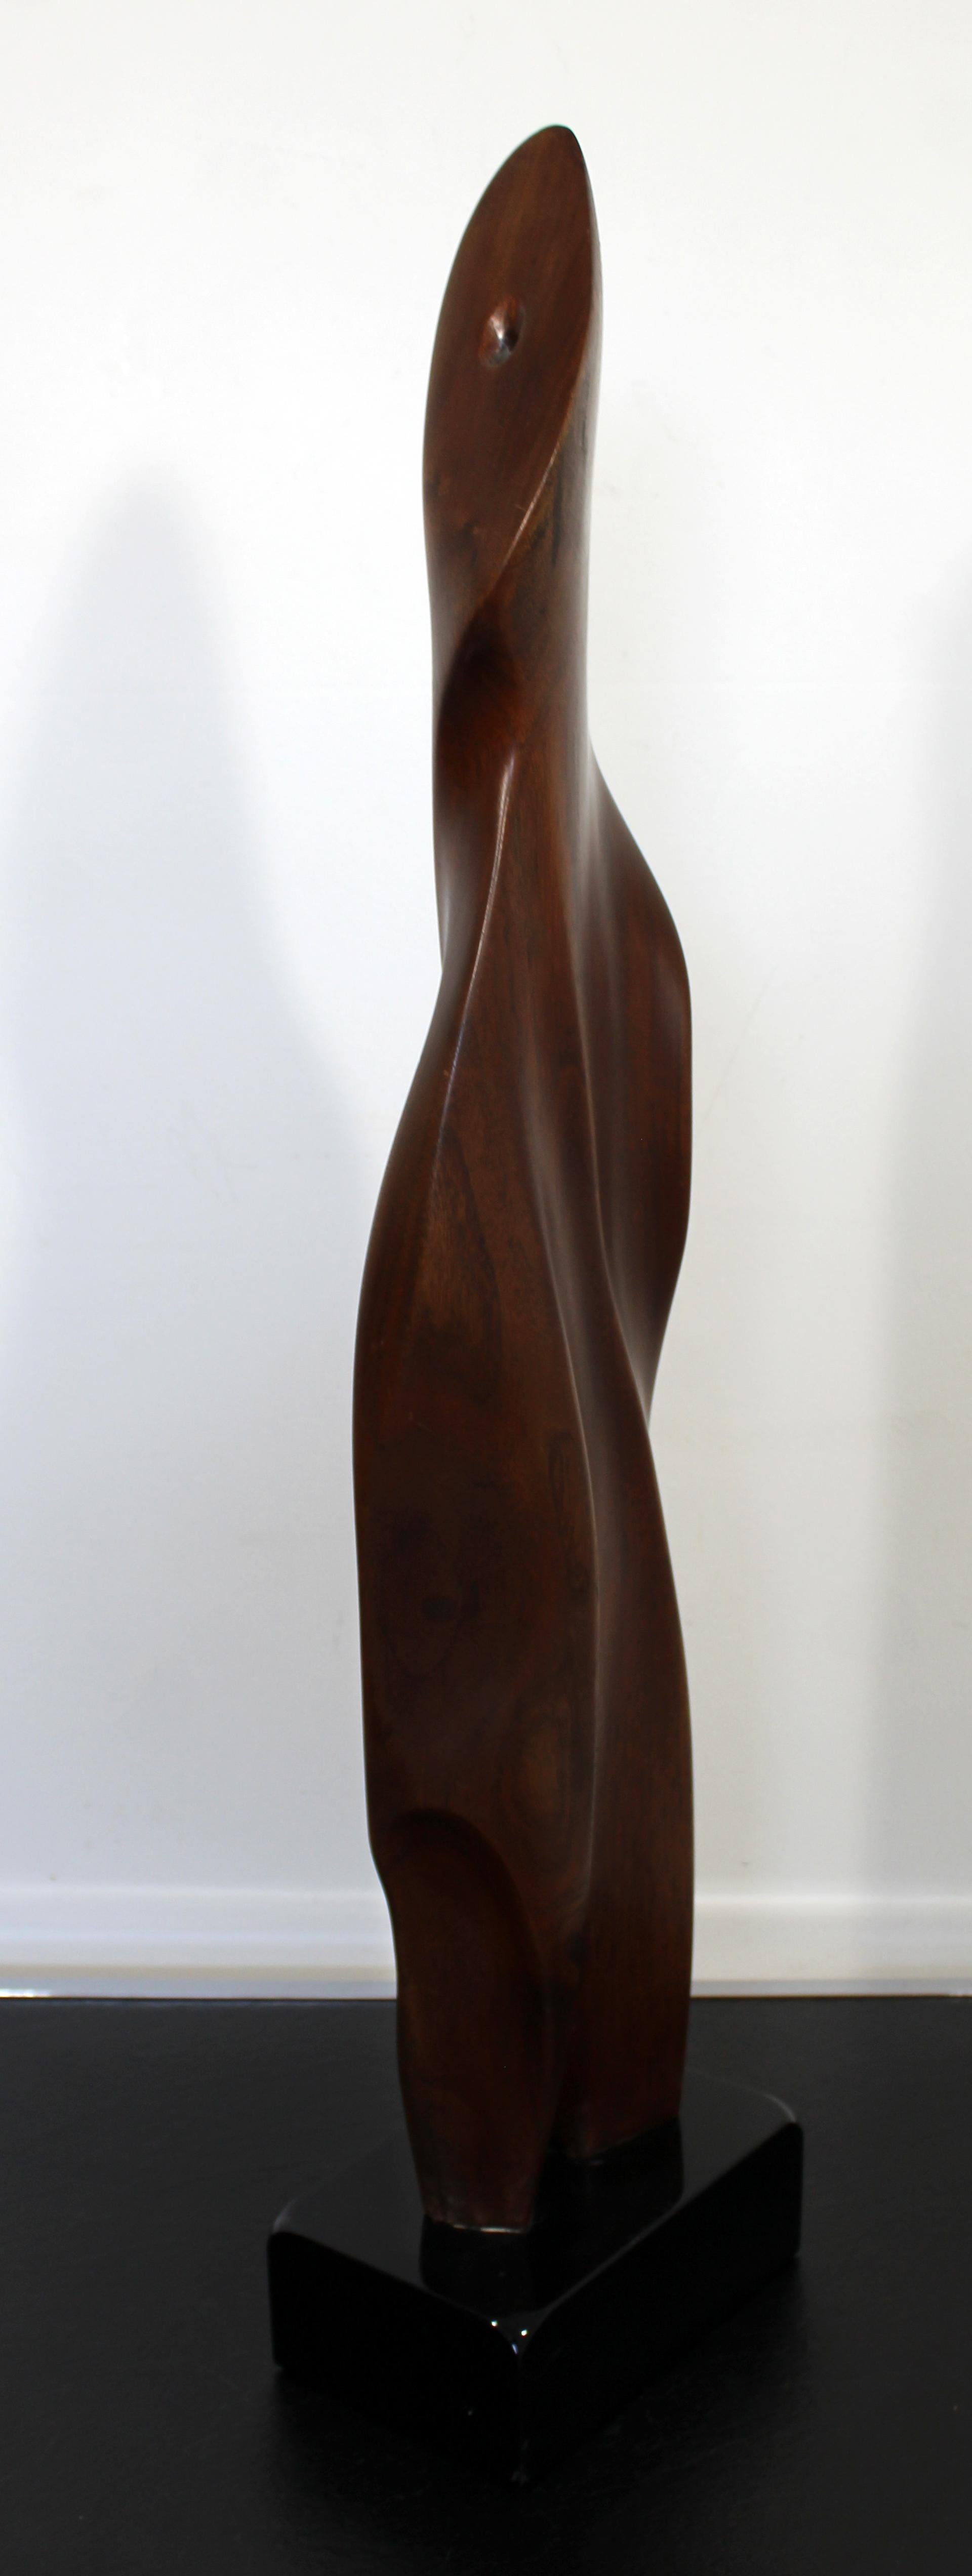 For your consideration is a sensuous wood carved sculpture titled 